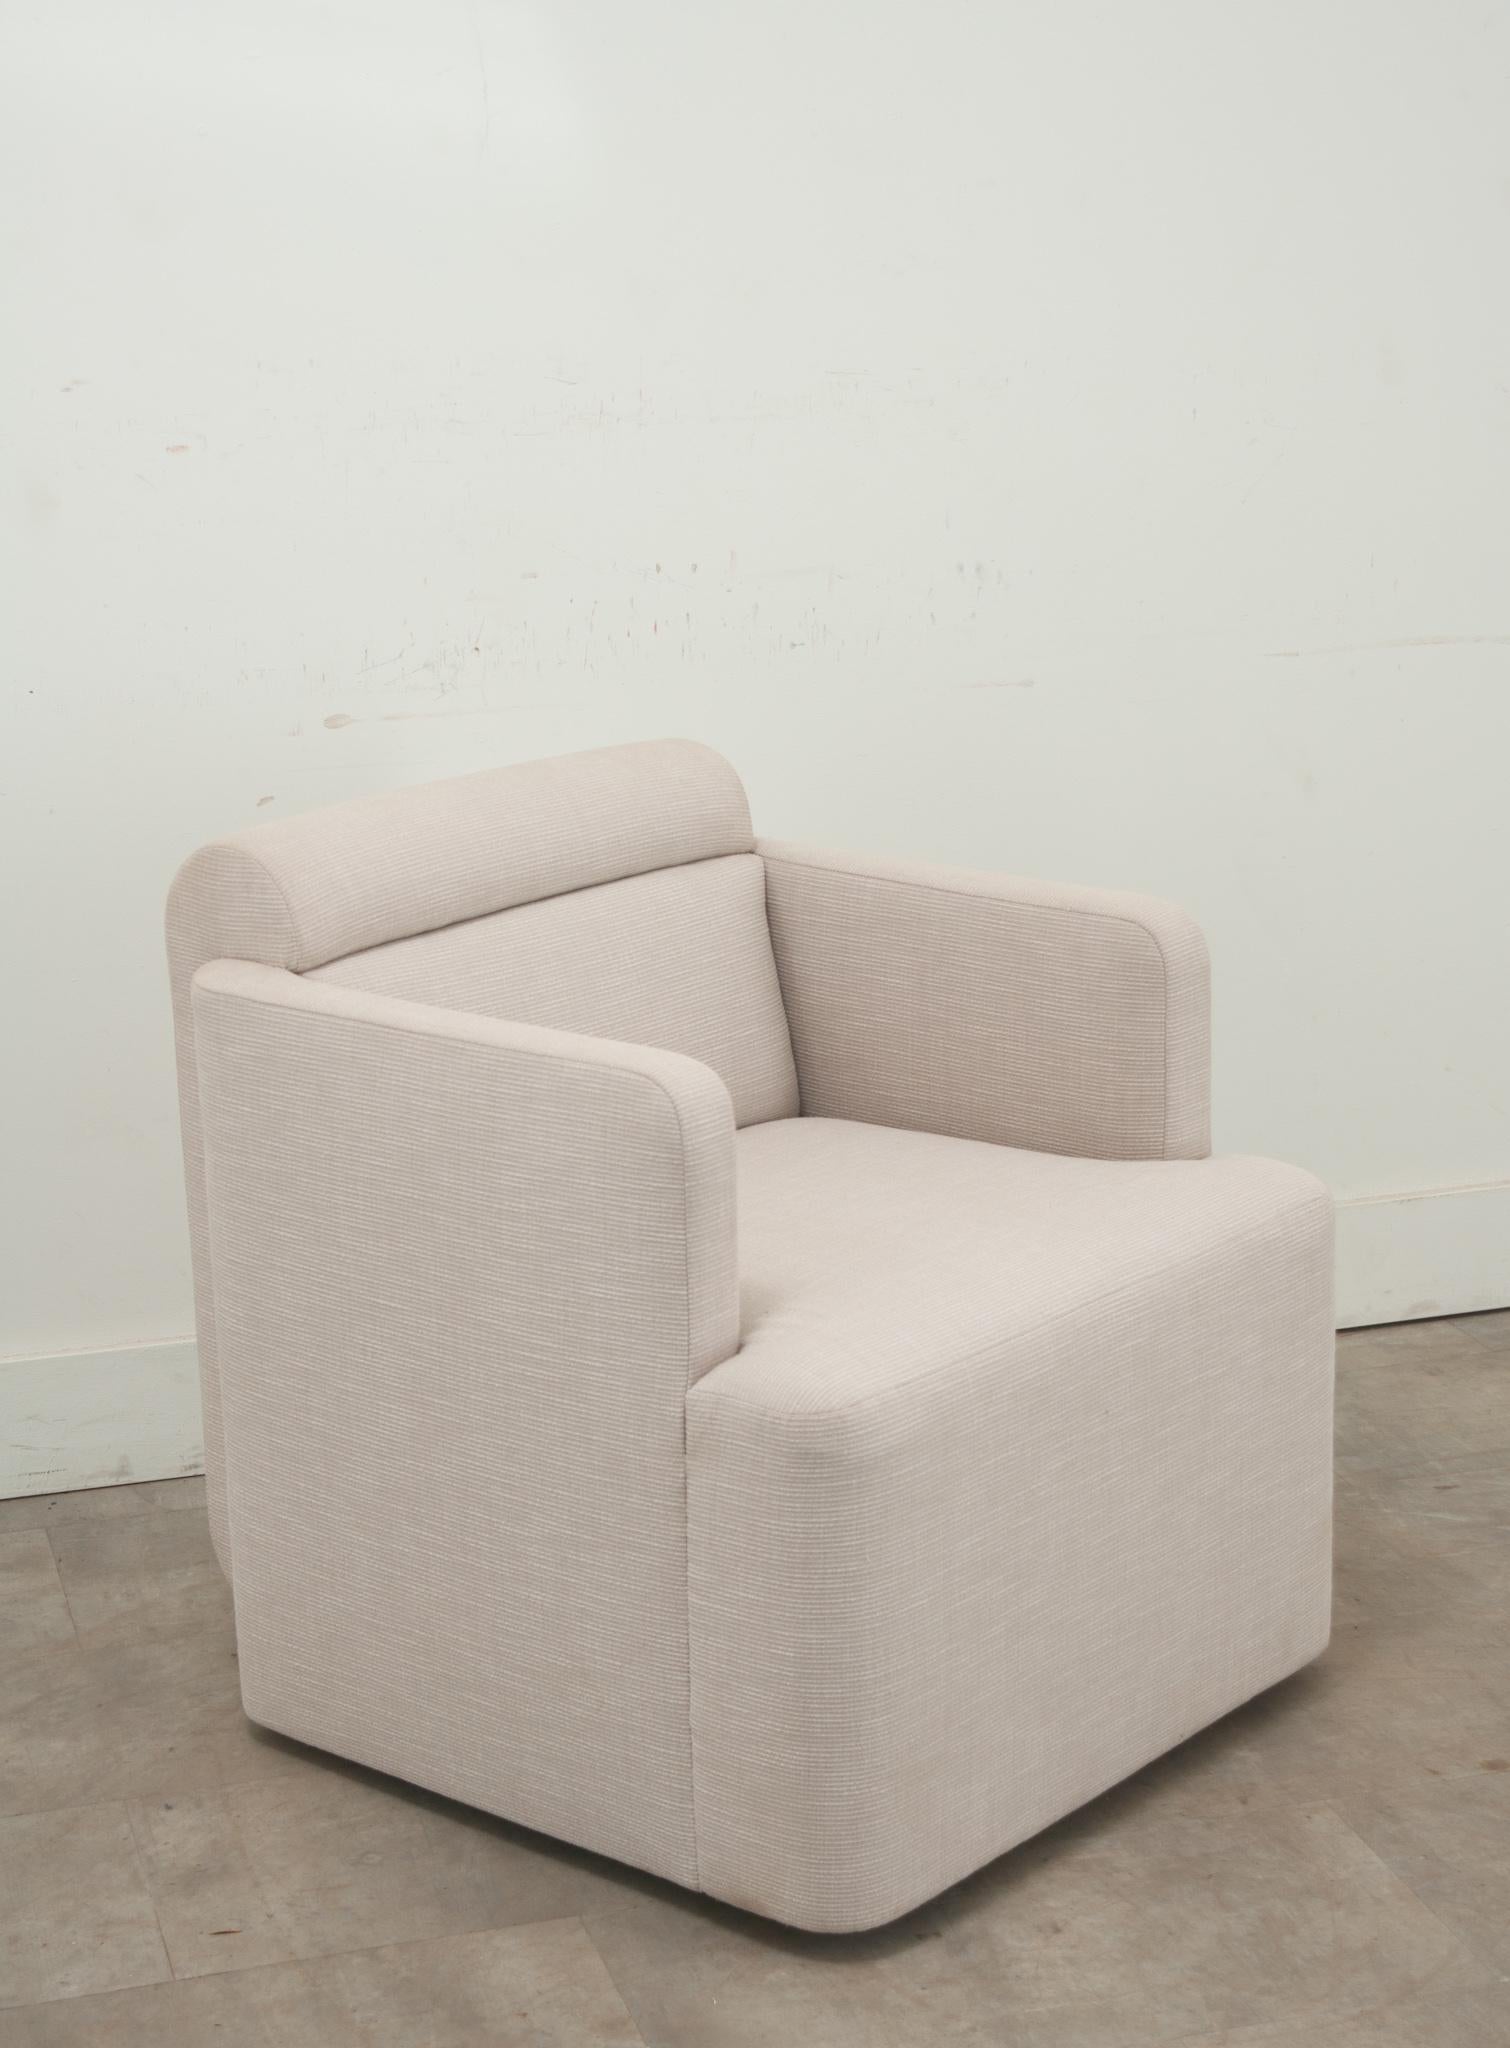 A comfortable custom upholstered swivel armchair recently built and upholstered by Dmitriy Co. Be sure to view the detailed images to get a closer look at this custom swivel chair. 